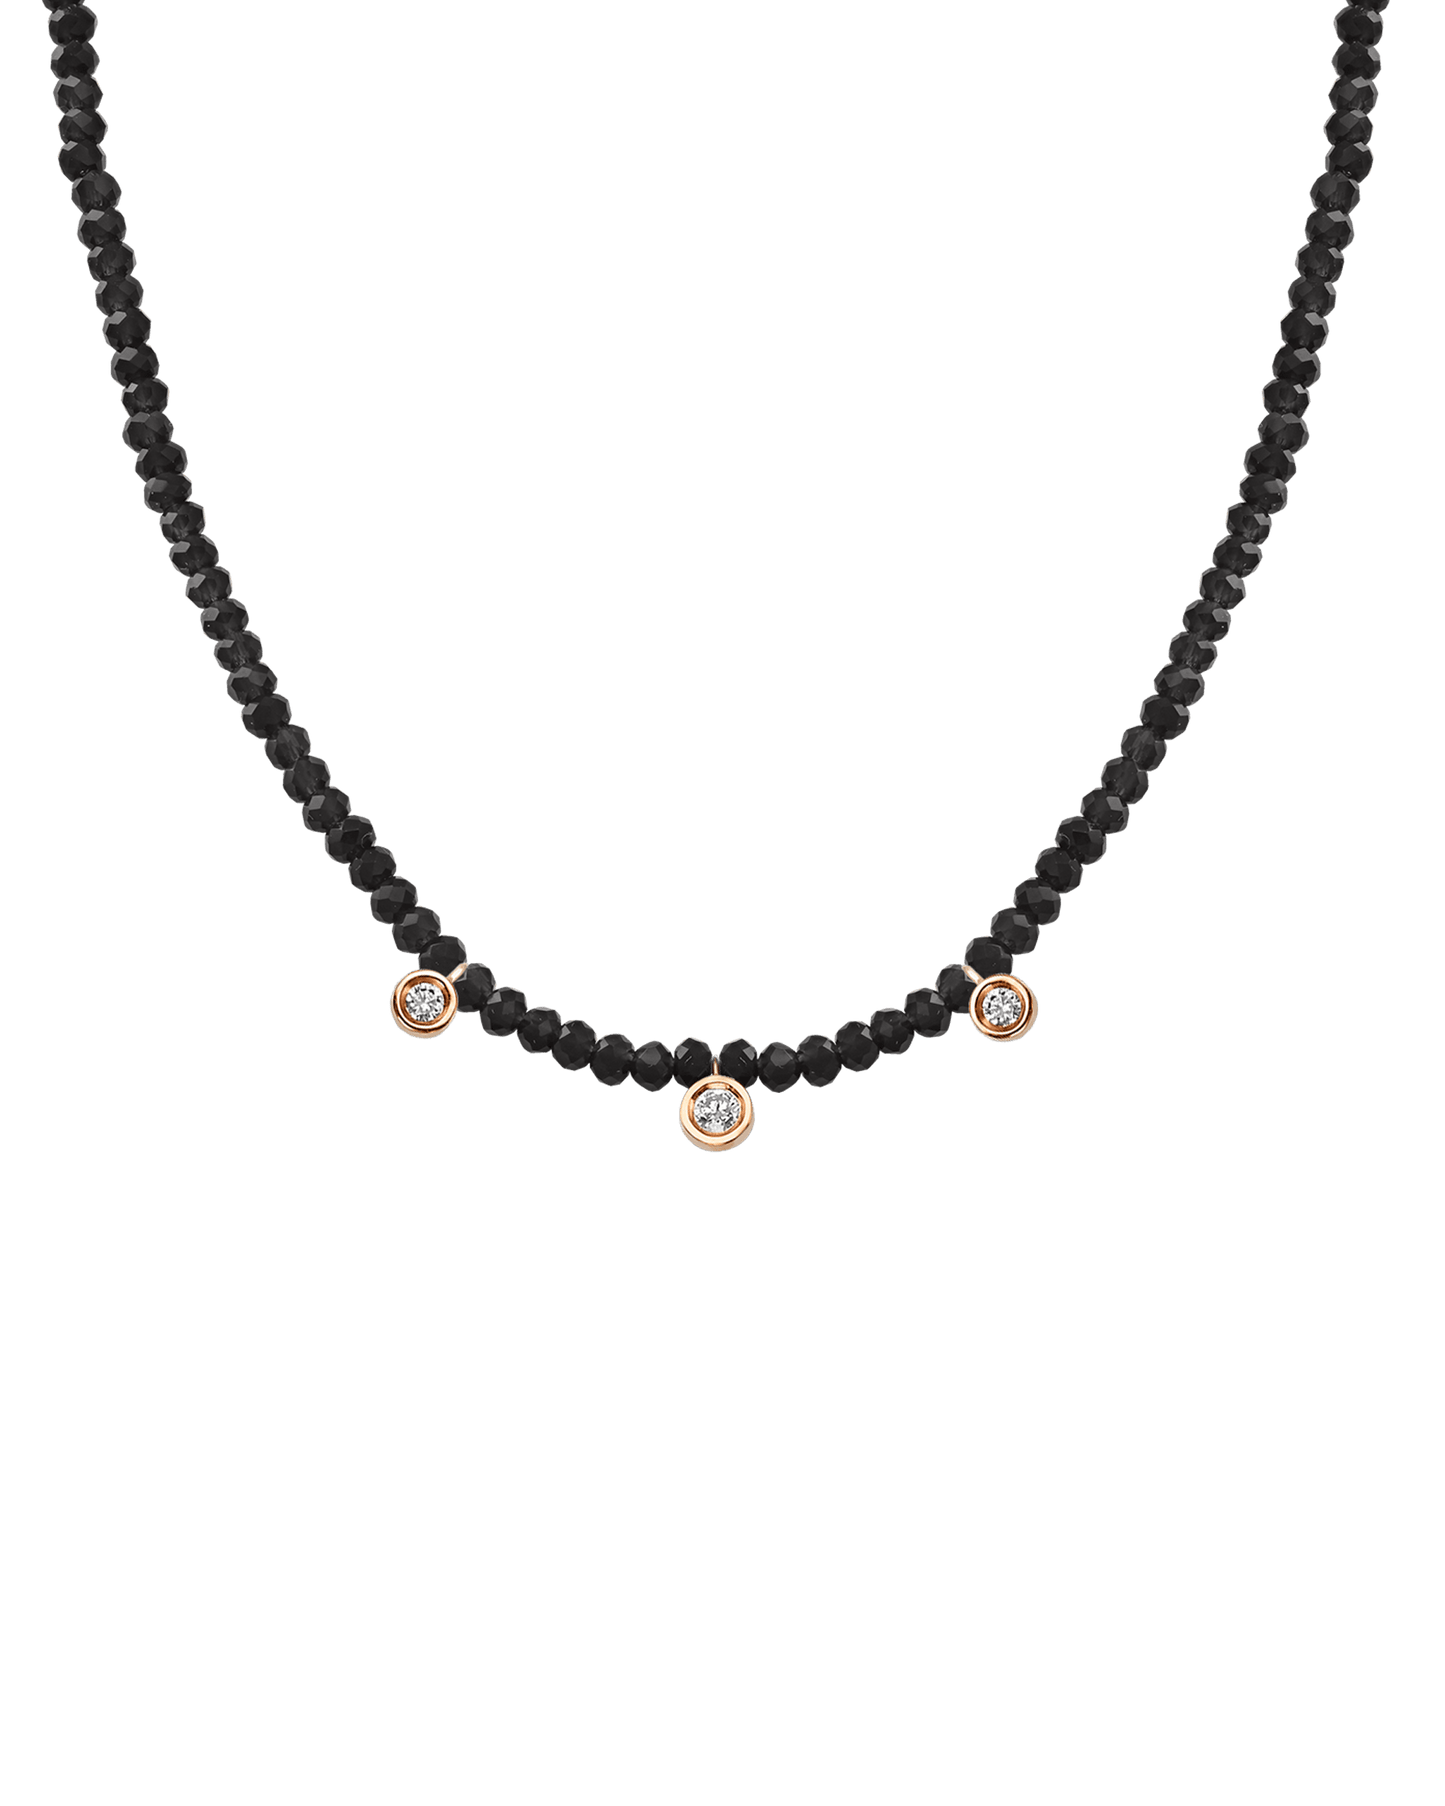 Black Spinel Gemstone & Three diamonds Necklace - 14K Rose Gold Necklaces magal-dev Glass Beads Black Spinnel 14" - Collar 